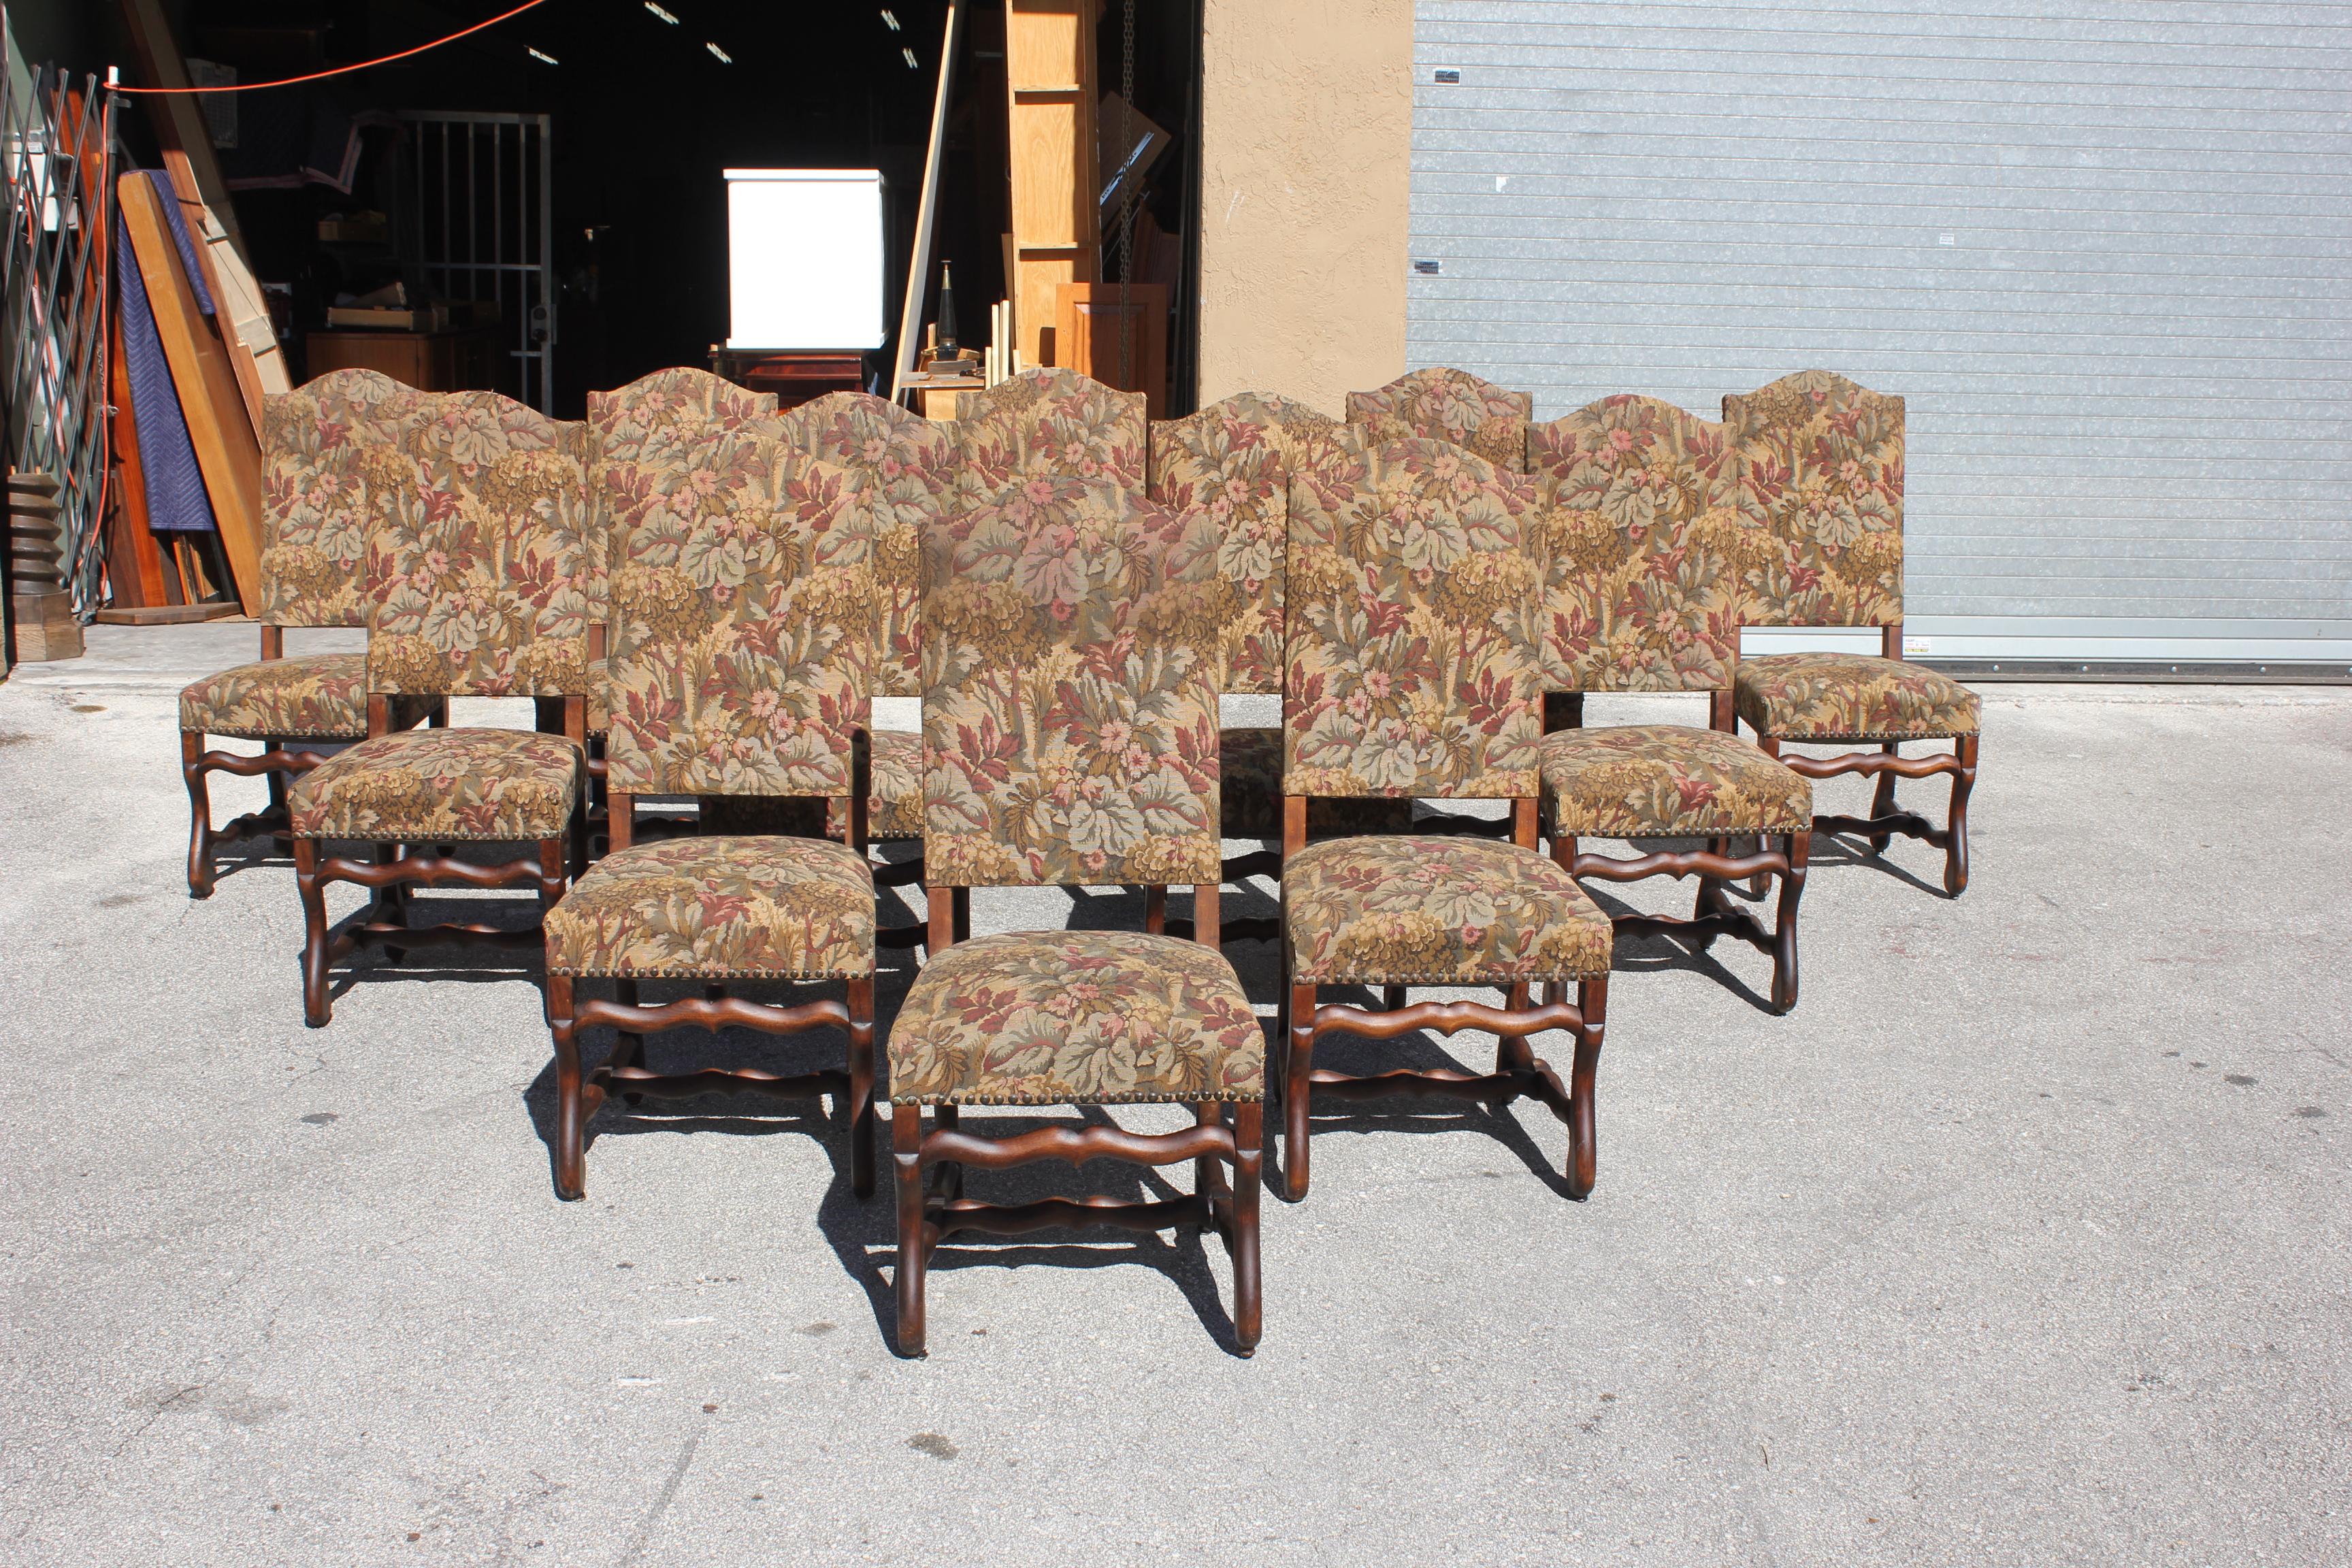 Fine set of 12 Louis XIII style Os de Mouton dining chairs with chapeau de gendarme backs, circa 1900th century. Vintage fabric upholstery with nail heads, the solid walnut chair frames are in very good condition. From South France. (fabric